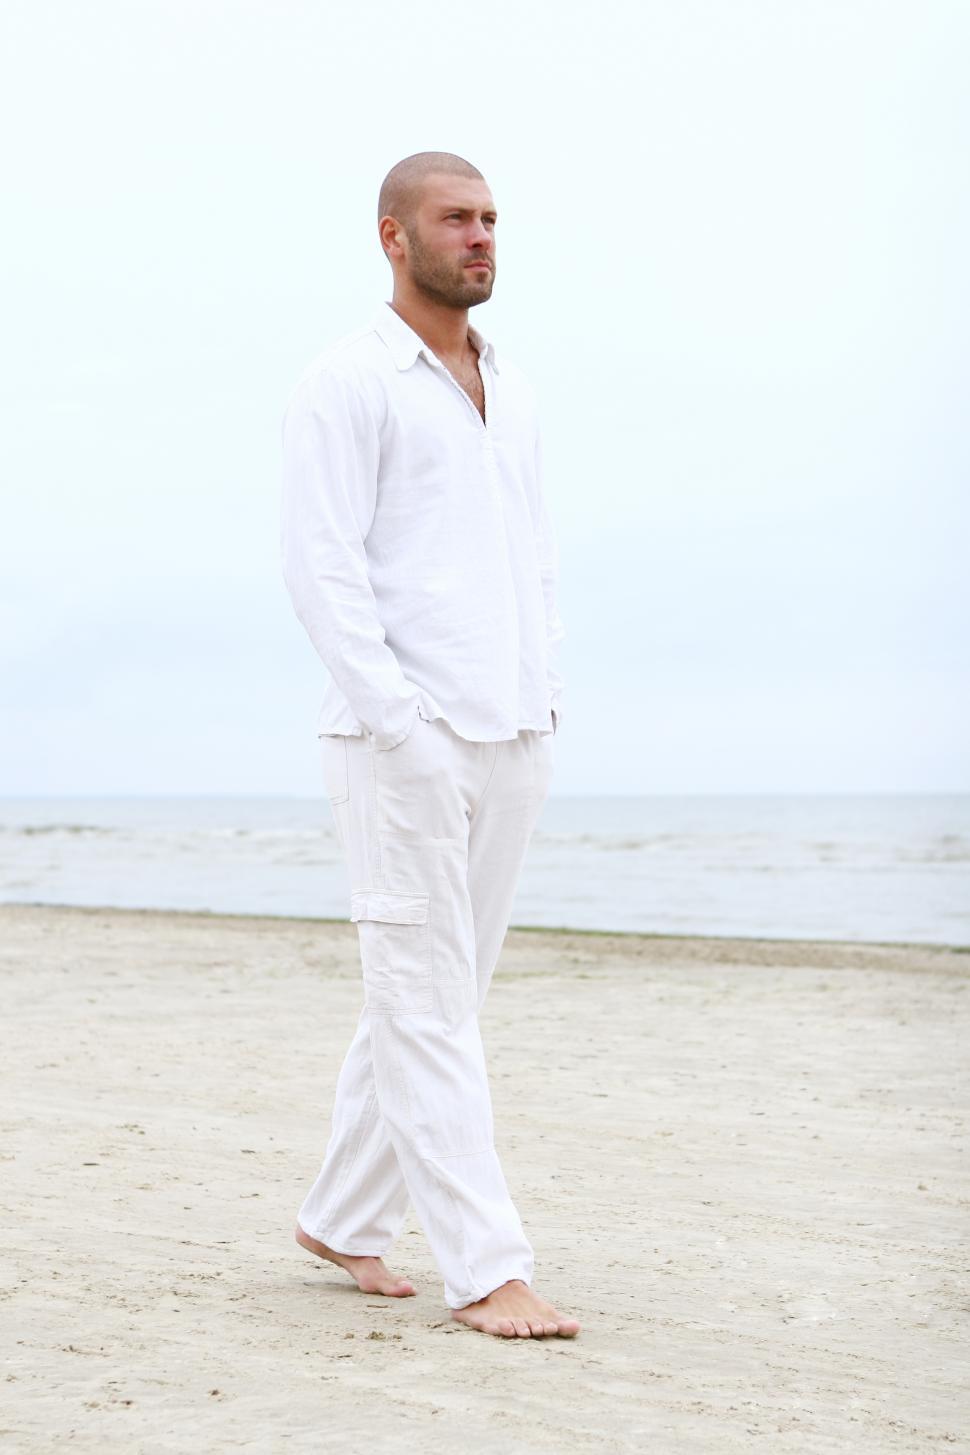 Free Image of Man in white walking on the beach 